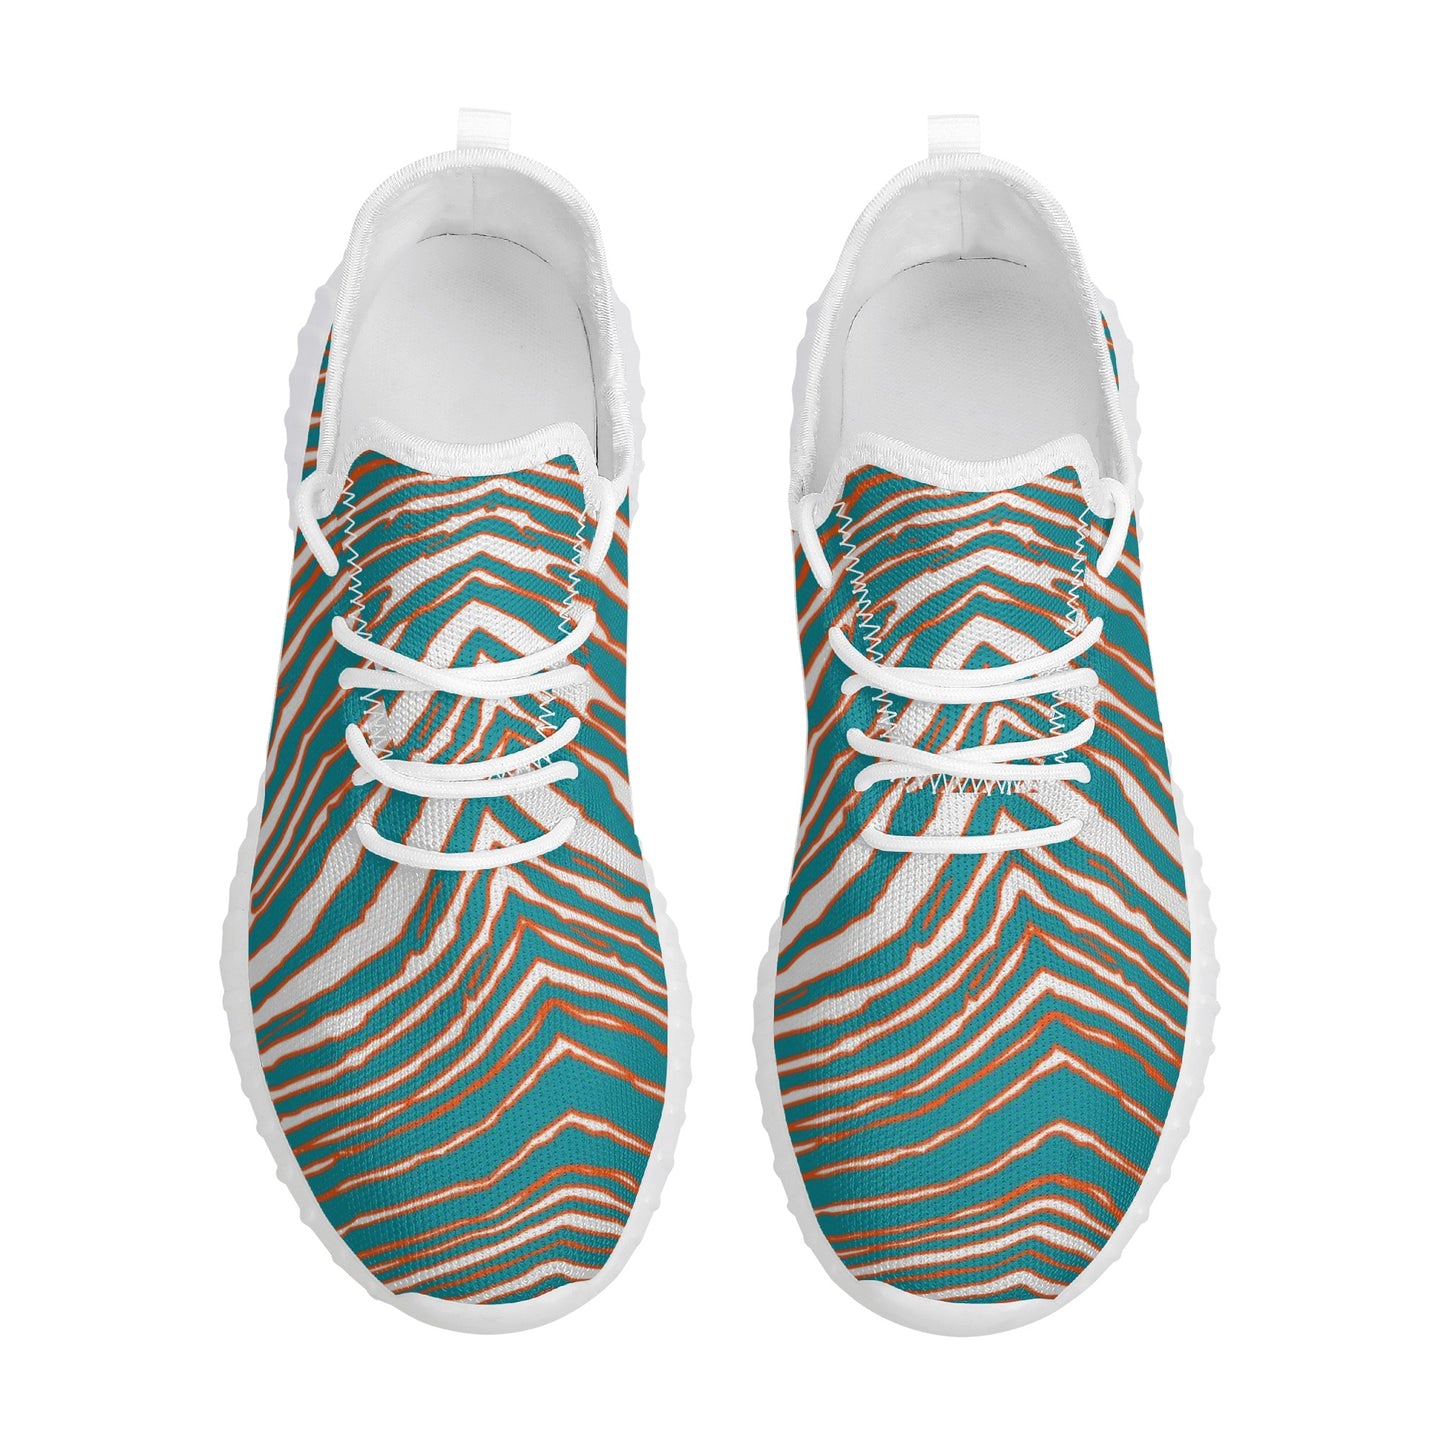 Miami Fins Up Womens Mesh Knit Sneakers